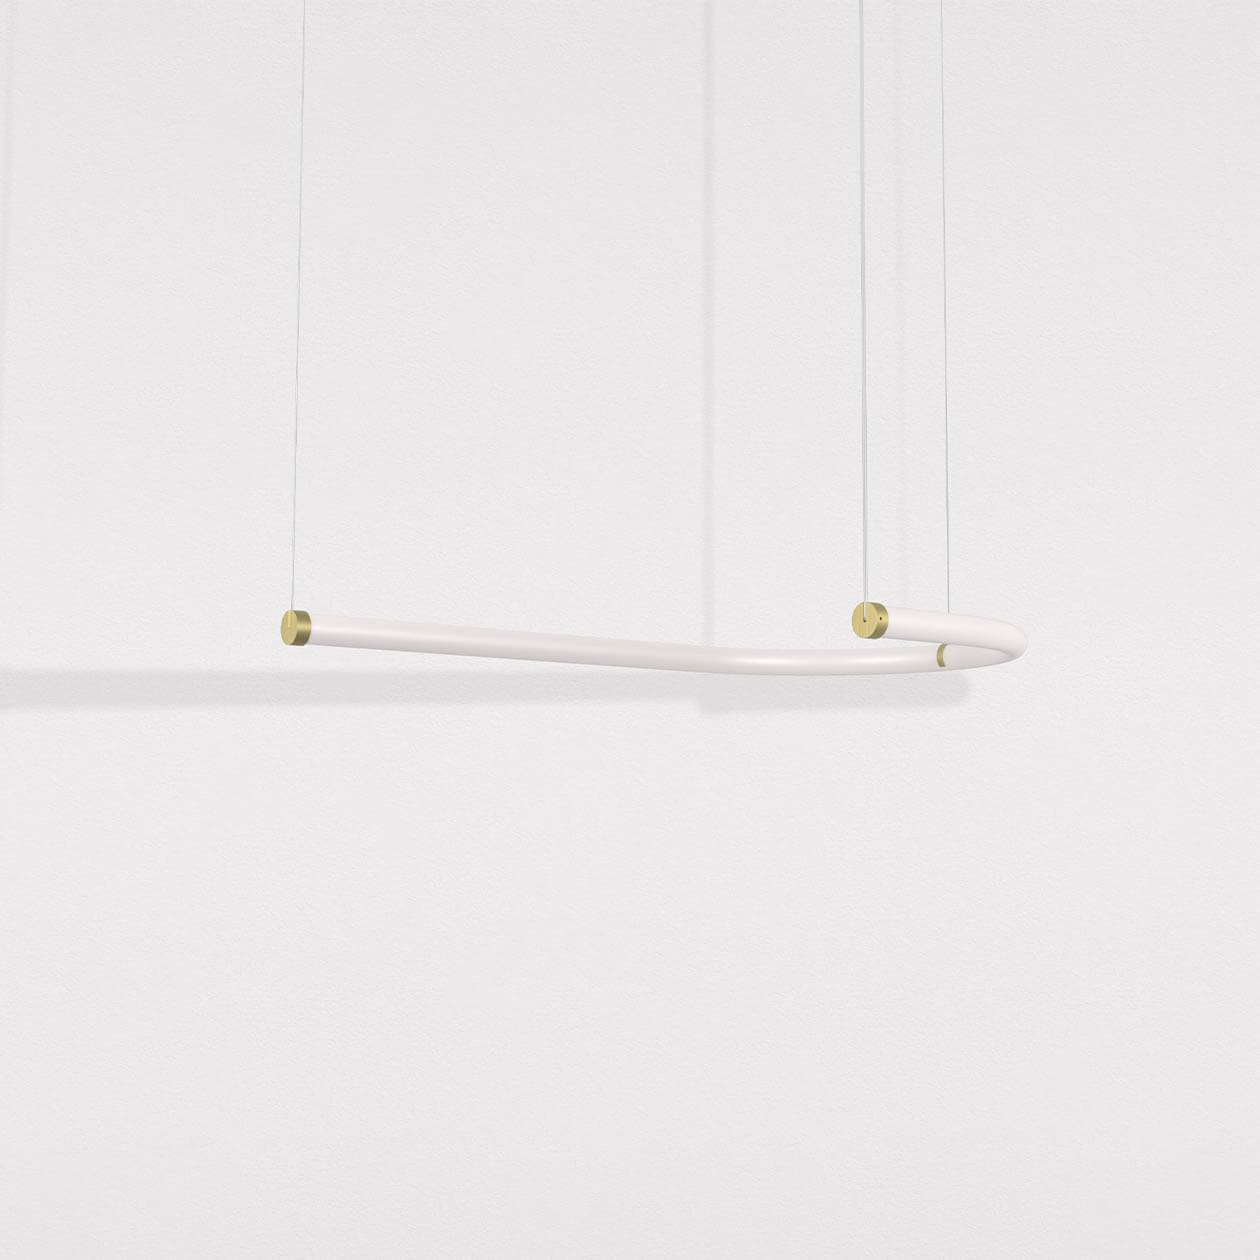 pendant lamp unseen J - 3 wires side view